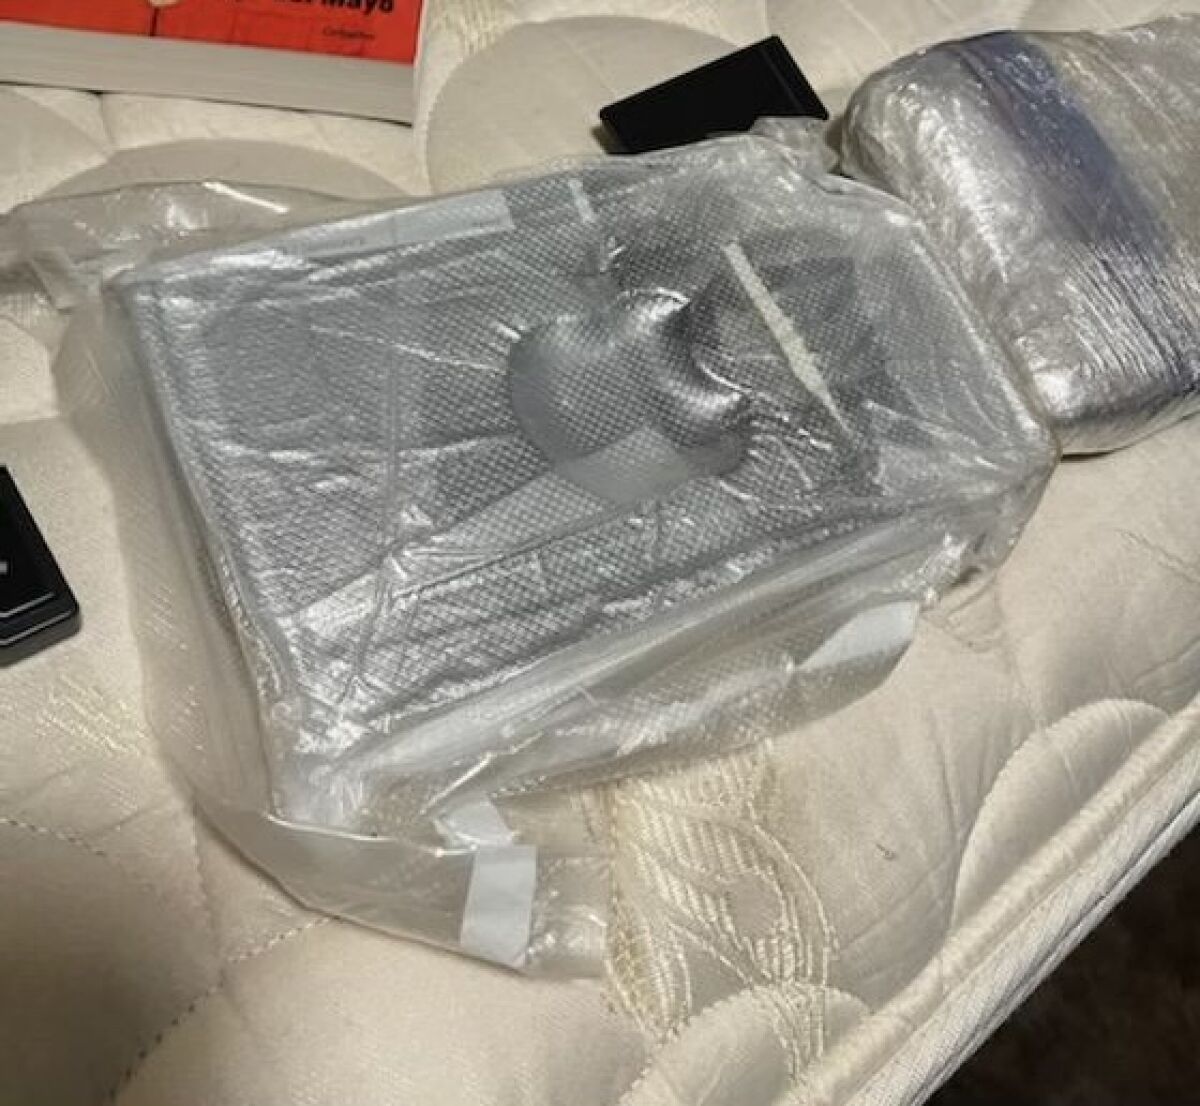 Plastic-wrapped packages sitting on a mattress